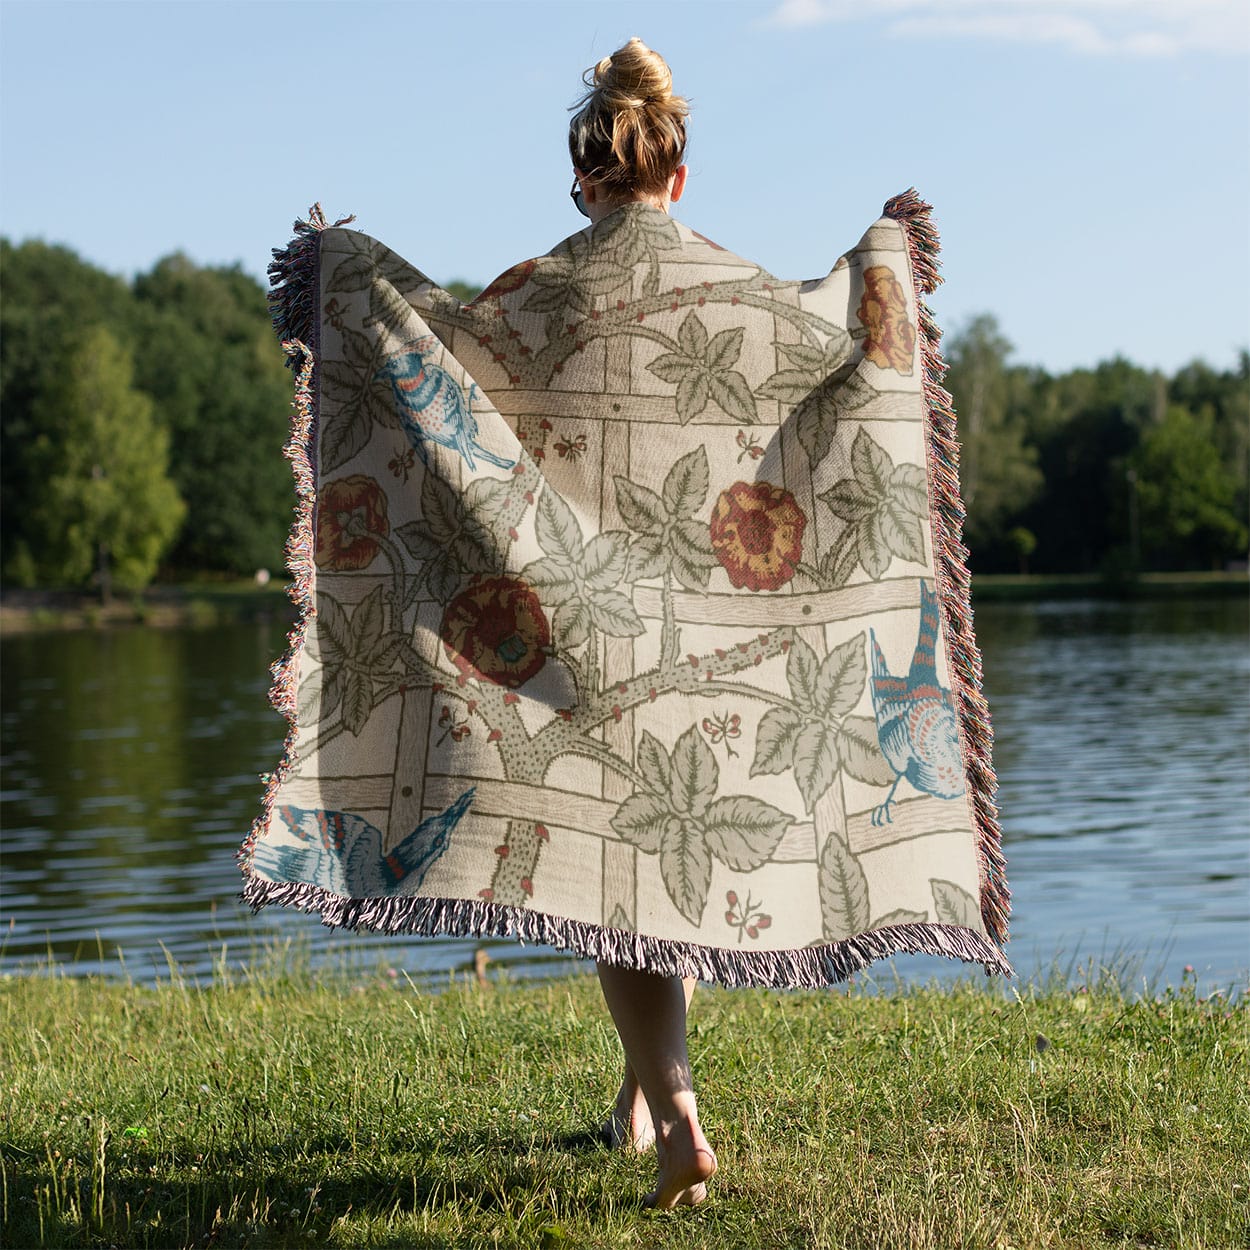 Spring Pattern Woven Blanket Held on a Woman's Back Outside